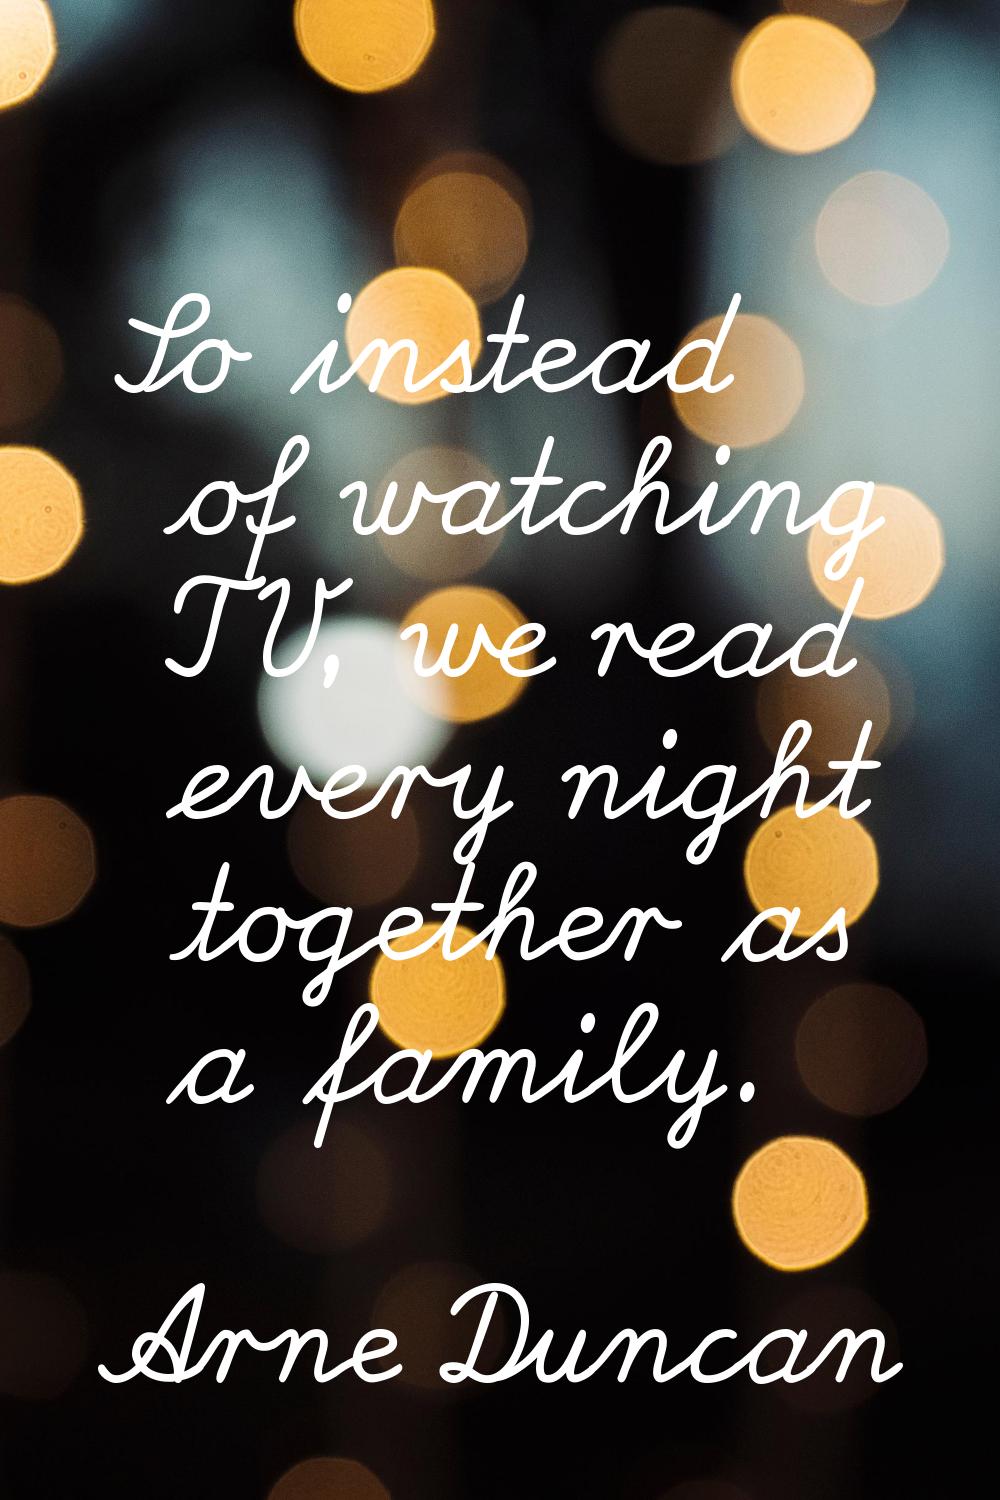 So instead of watching TV, we read every night together as a family.